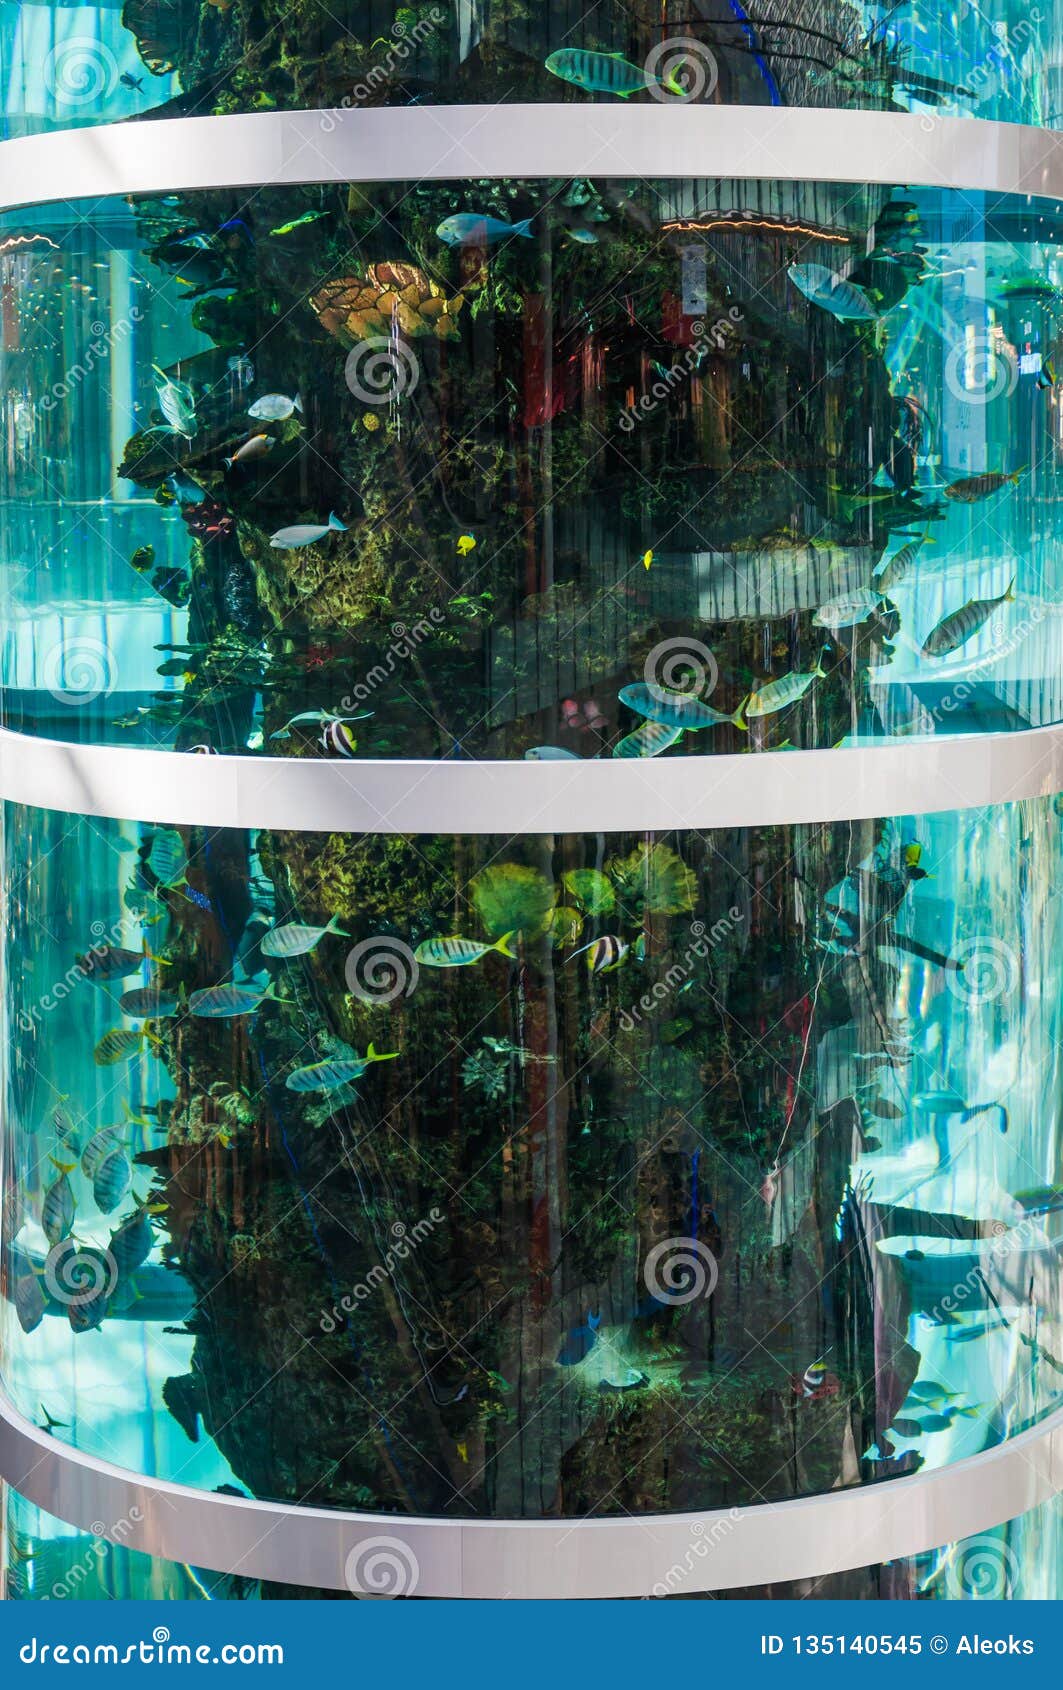 A Fragment of the Tallest Cylindrical Aquarium in the World in the